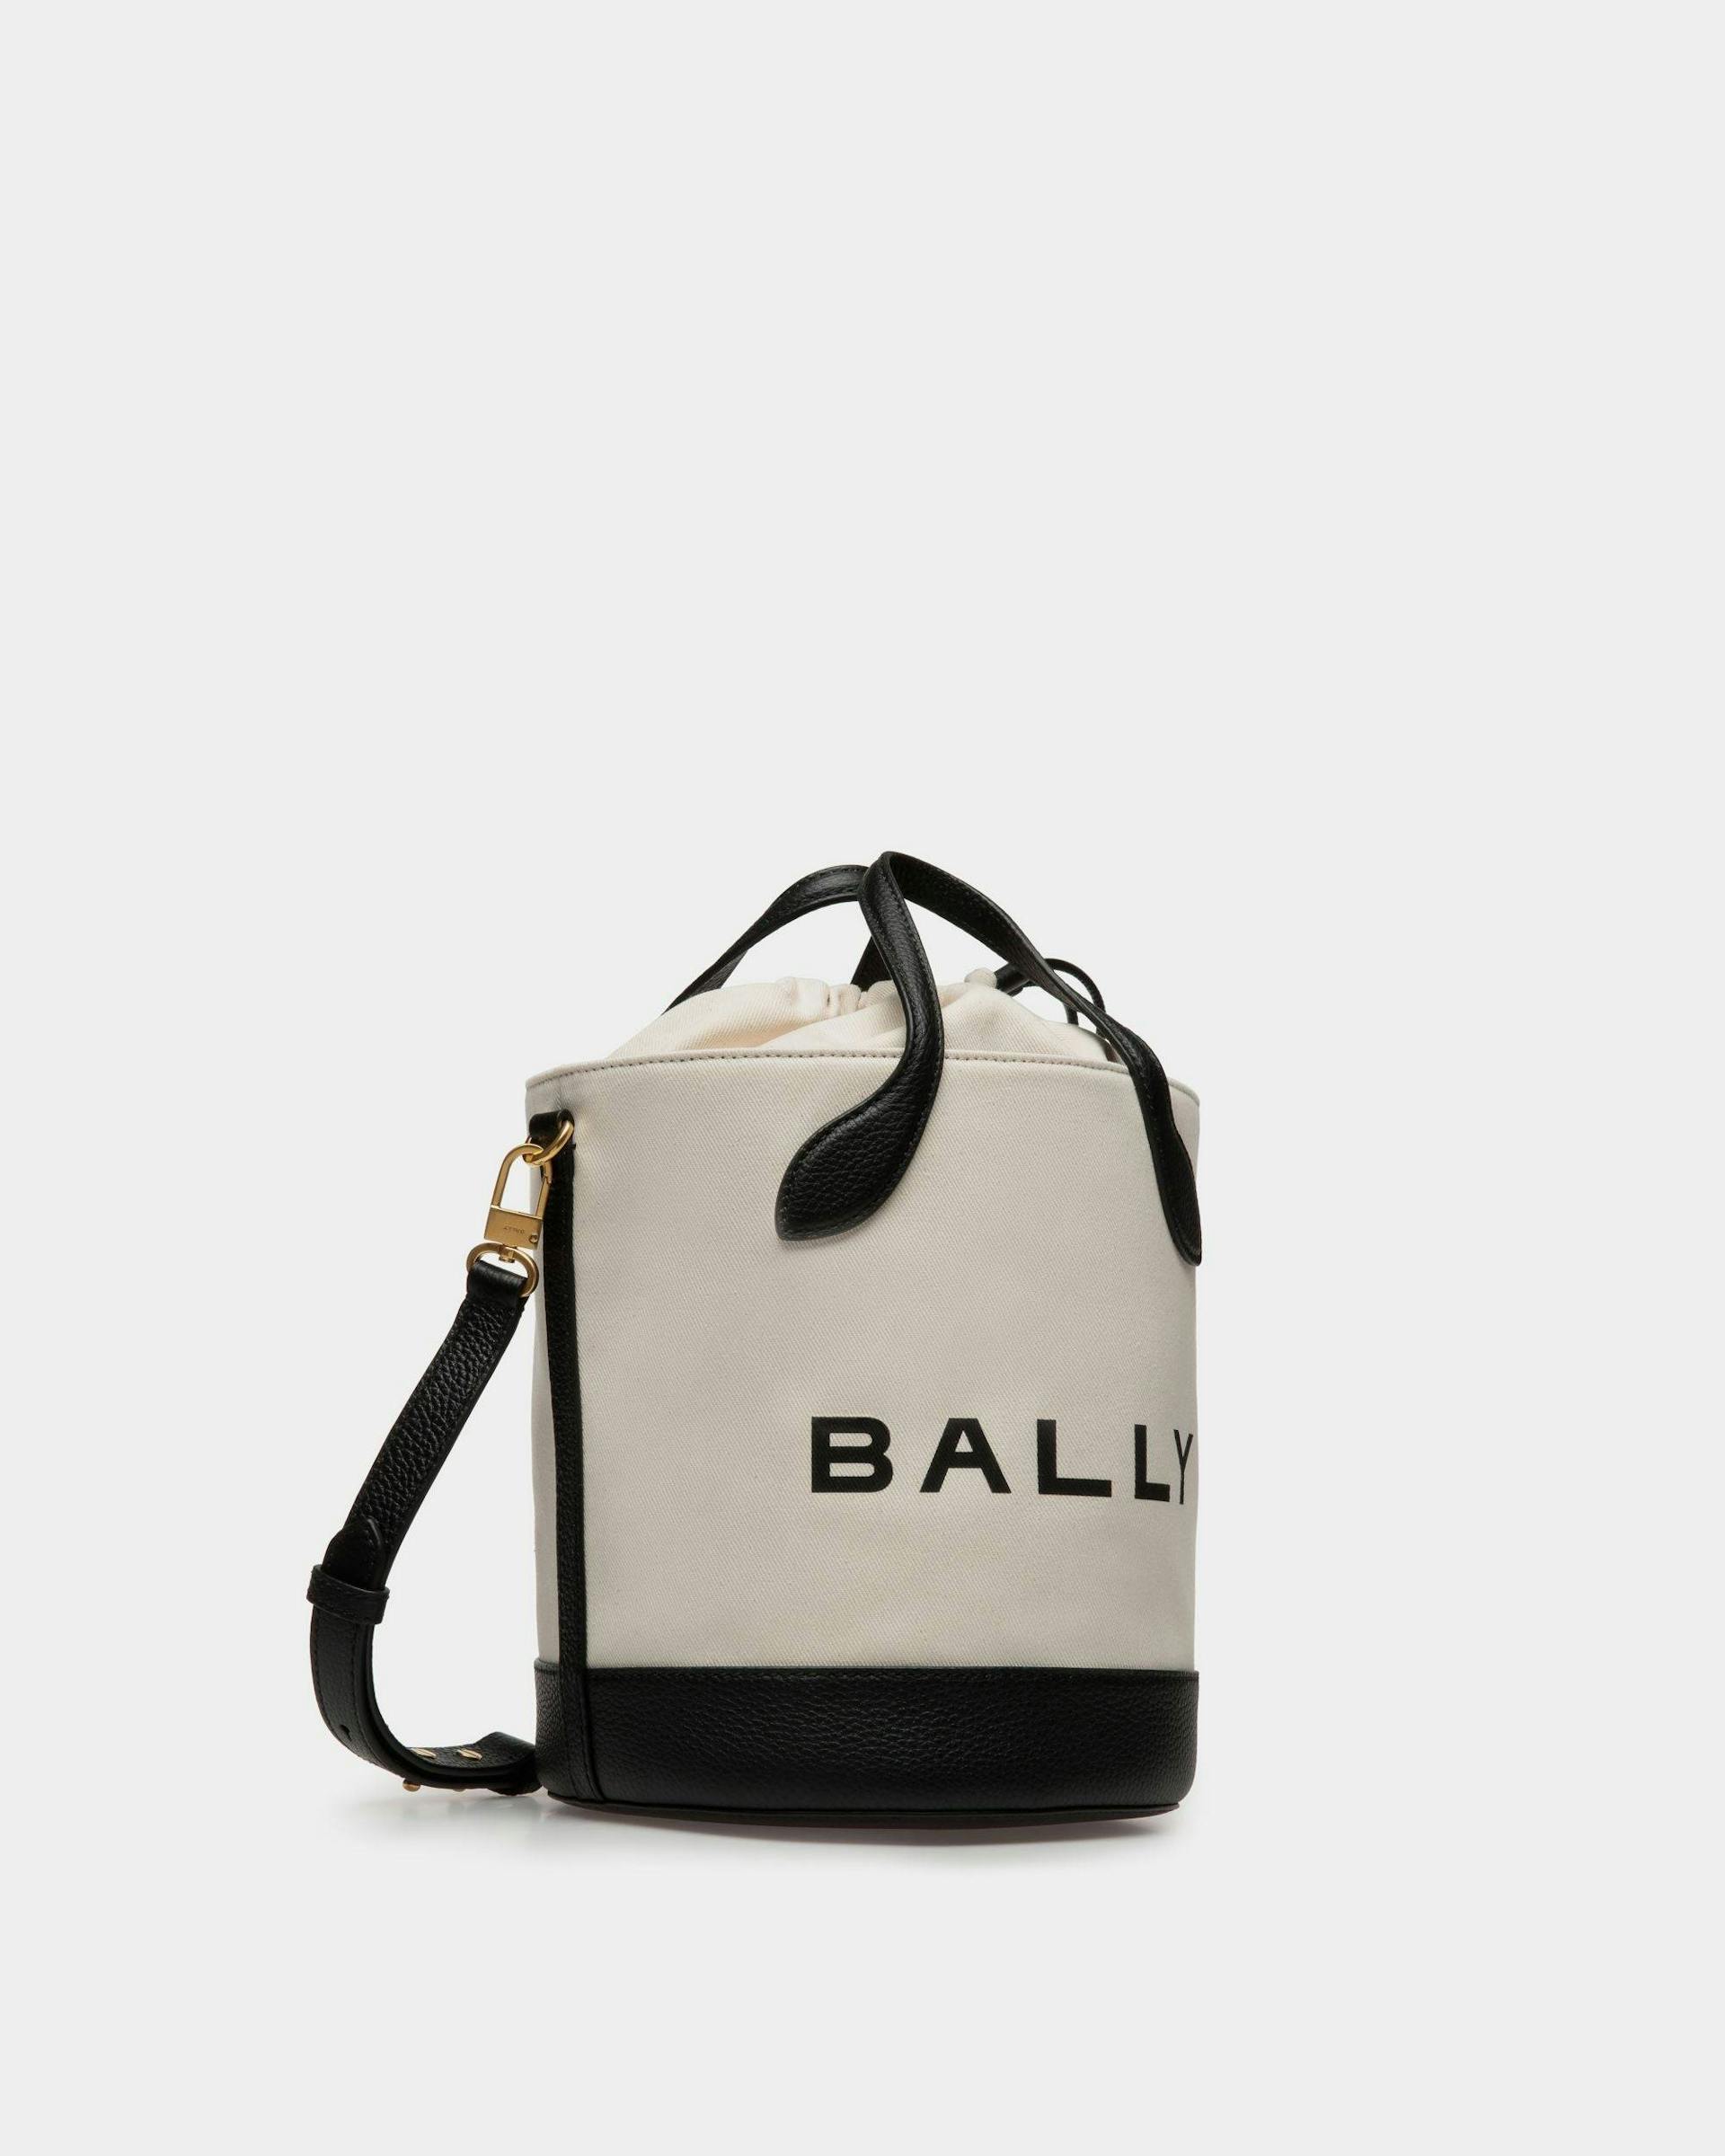 Women's Bar Bucket Bag In Natural And Black Fabric | Bally | Still Life 3/4 Front